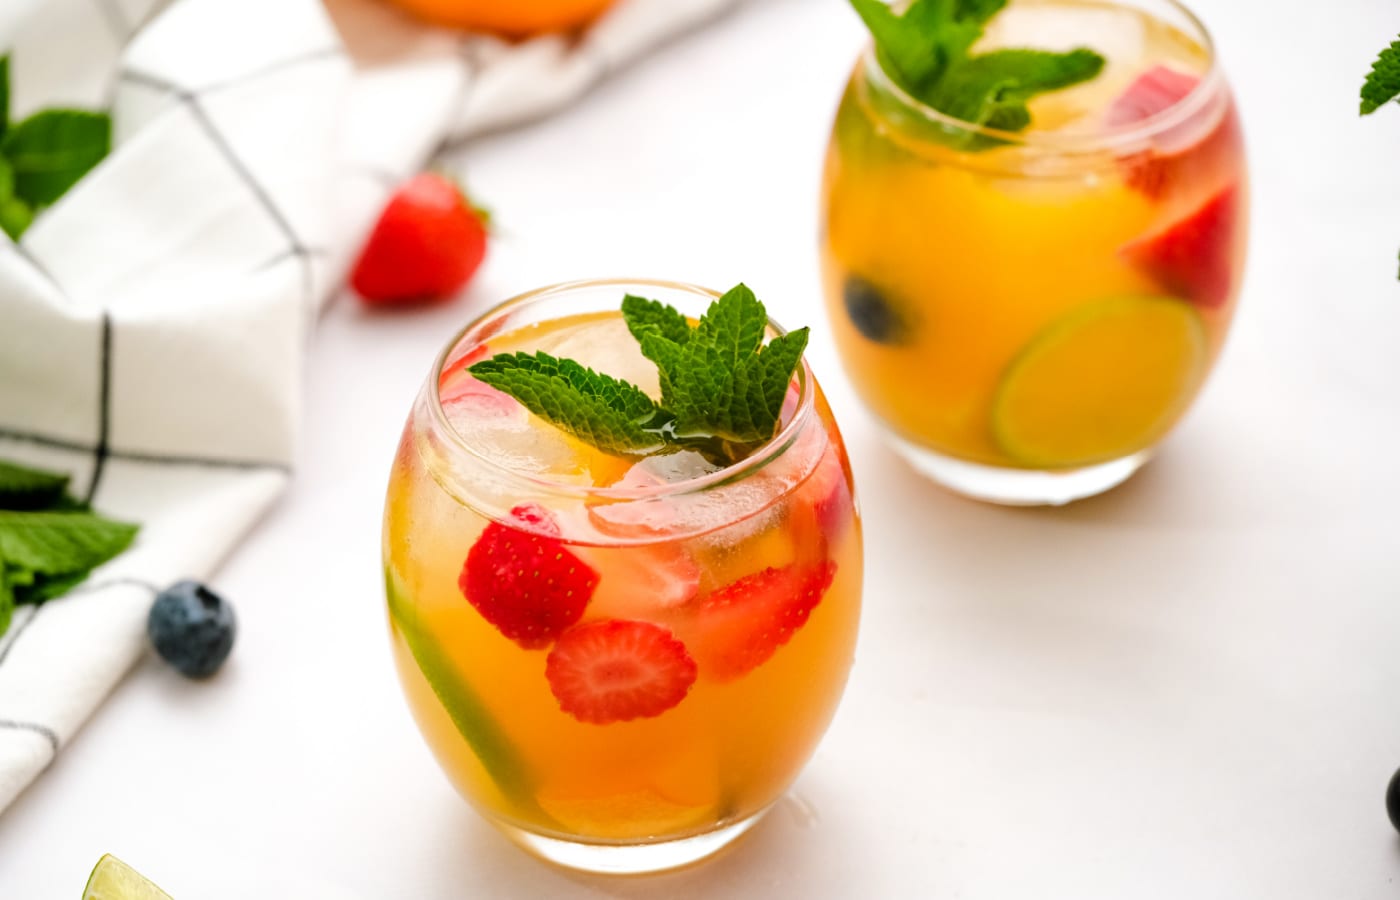 Refreshing Sangria, Perfect Beverage For A Summer Party – Between